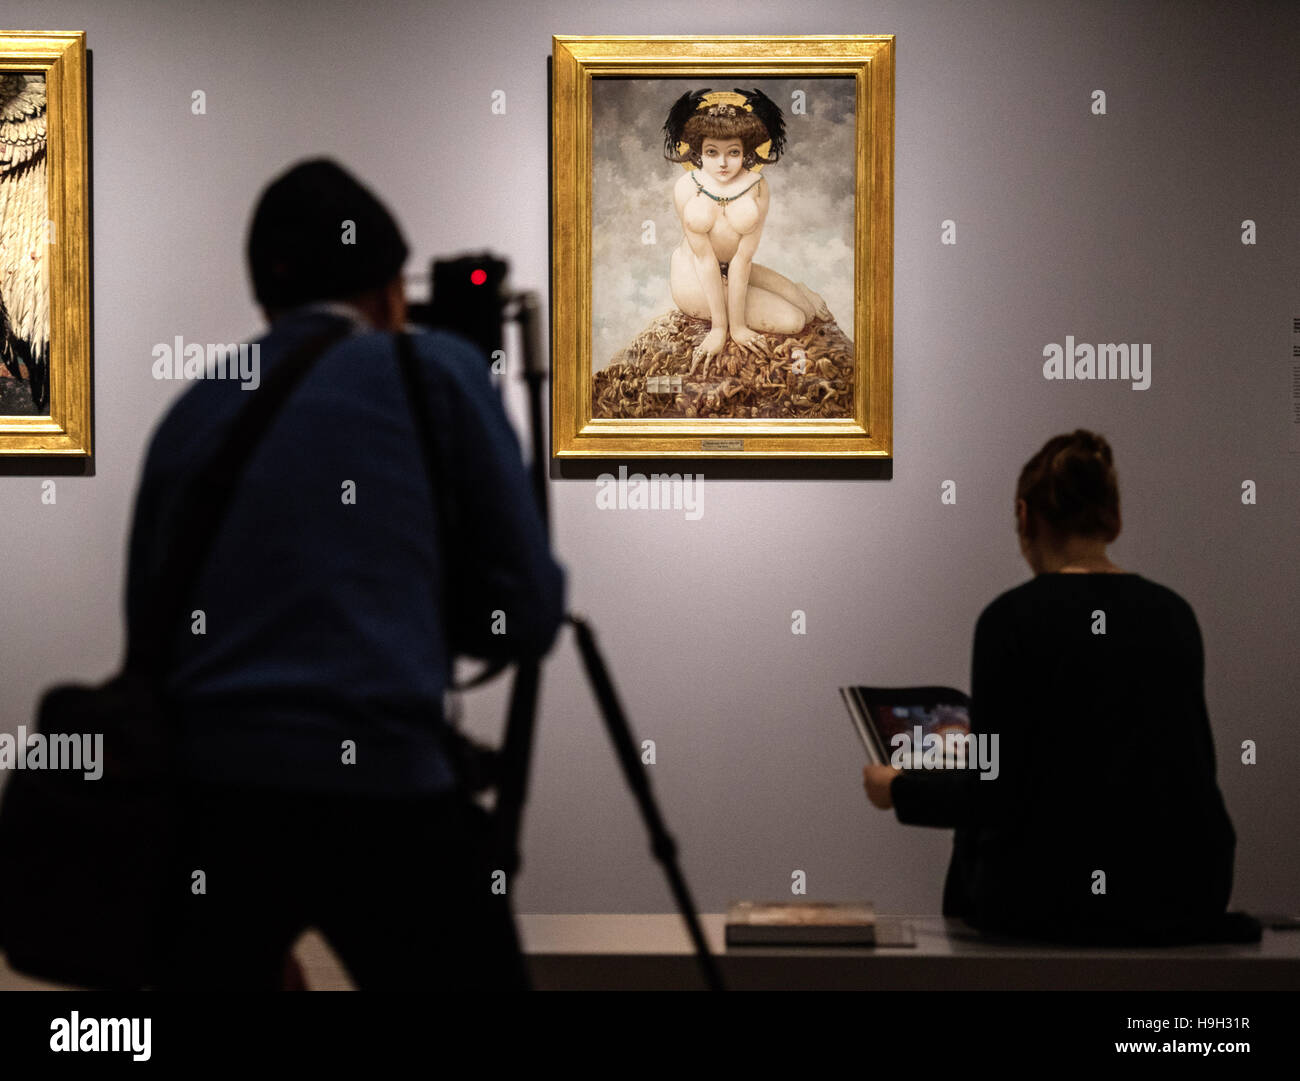 A photographer takes a picture of the painting 'Sie She' (1905, Gustav Adolf Mossa) at the Staedel Museum in Frankfurt am Main, Germany, 23 November 2016. The art exhibition Geschlechterkampf. Franz von Stuck bis Frida KahLo (lit. Battle of the Sexes. Franz von Stuck to Frida Kahlo) runs at the Staedel Museum from 24.11.2016 - 19.3.2017 and deals with masculine and feminine identities from the mid-19th century until the end of WWII. Photo: Andreas Arnold/dpa Stock Photo